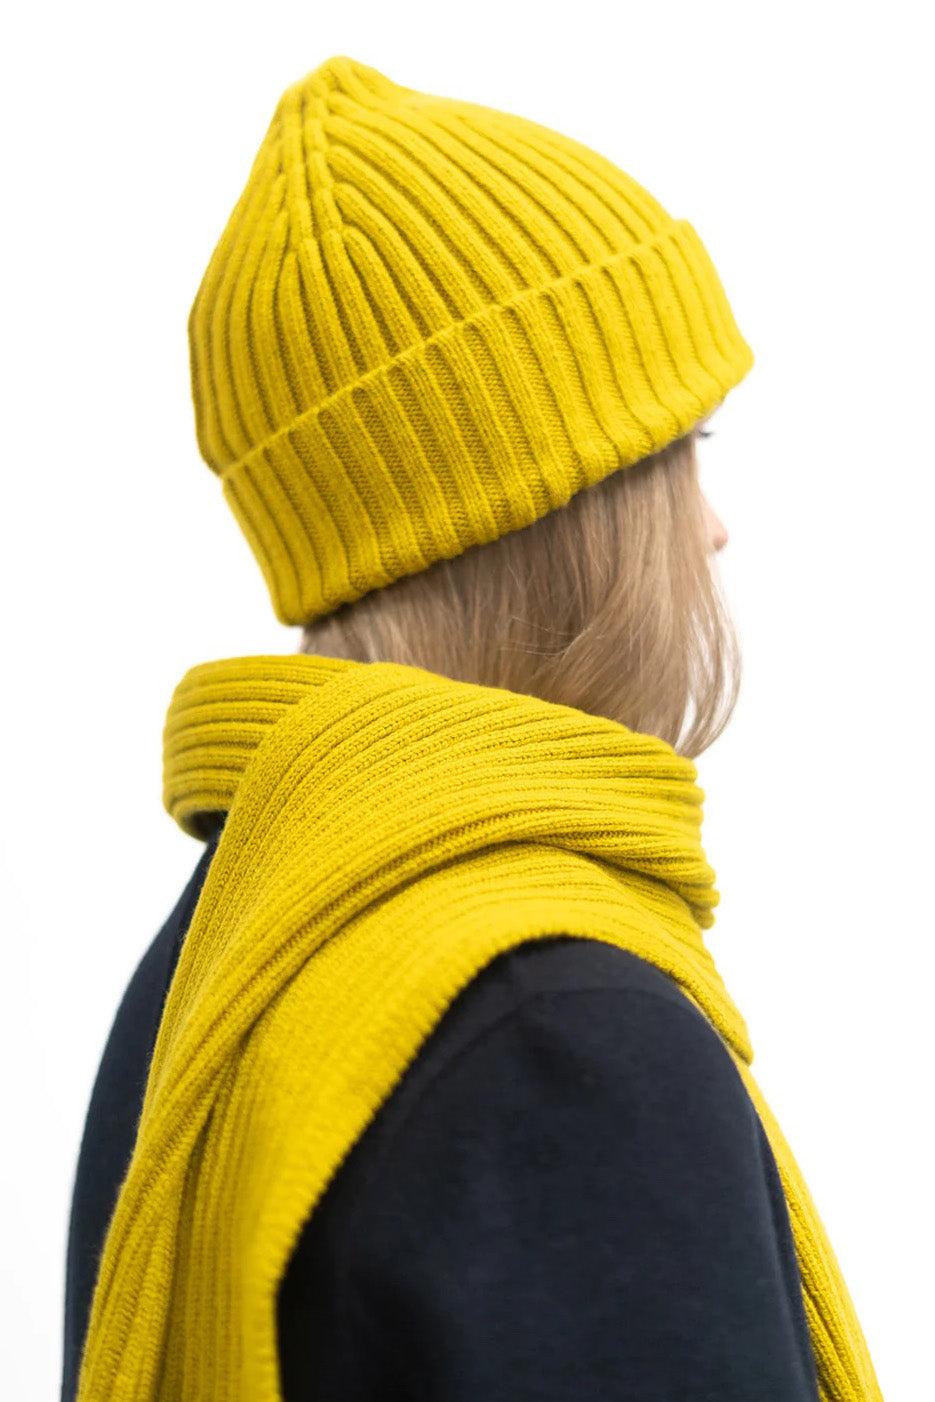 Knitted with a ribbed knit structure in a mustard yellow, this hat is a classic wardrobe staple. Made from the finest grade lambswool spun in Kinross